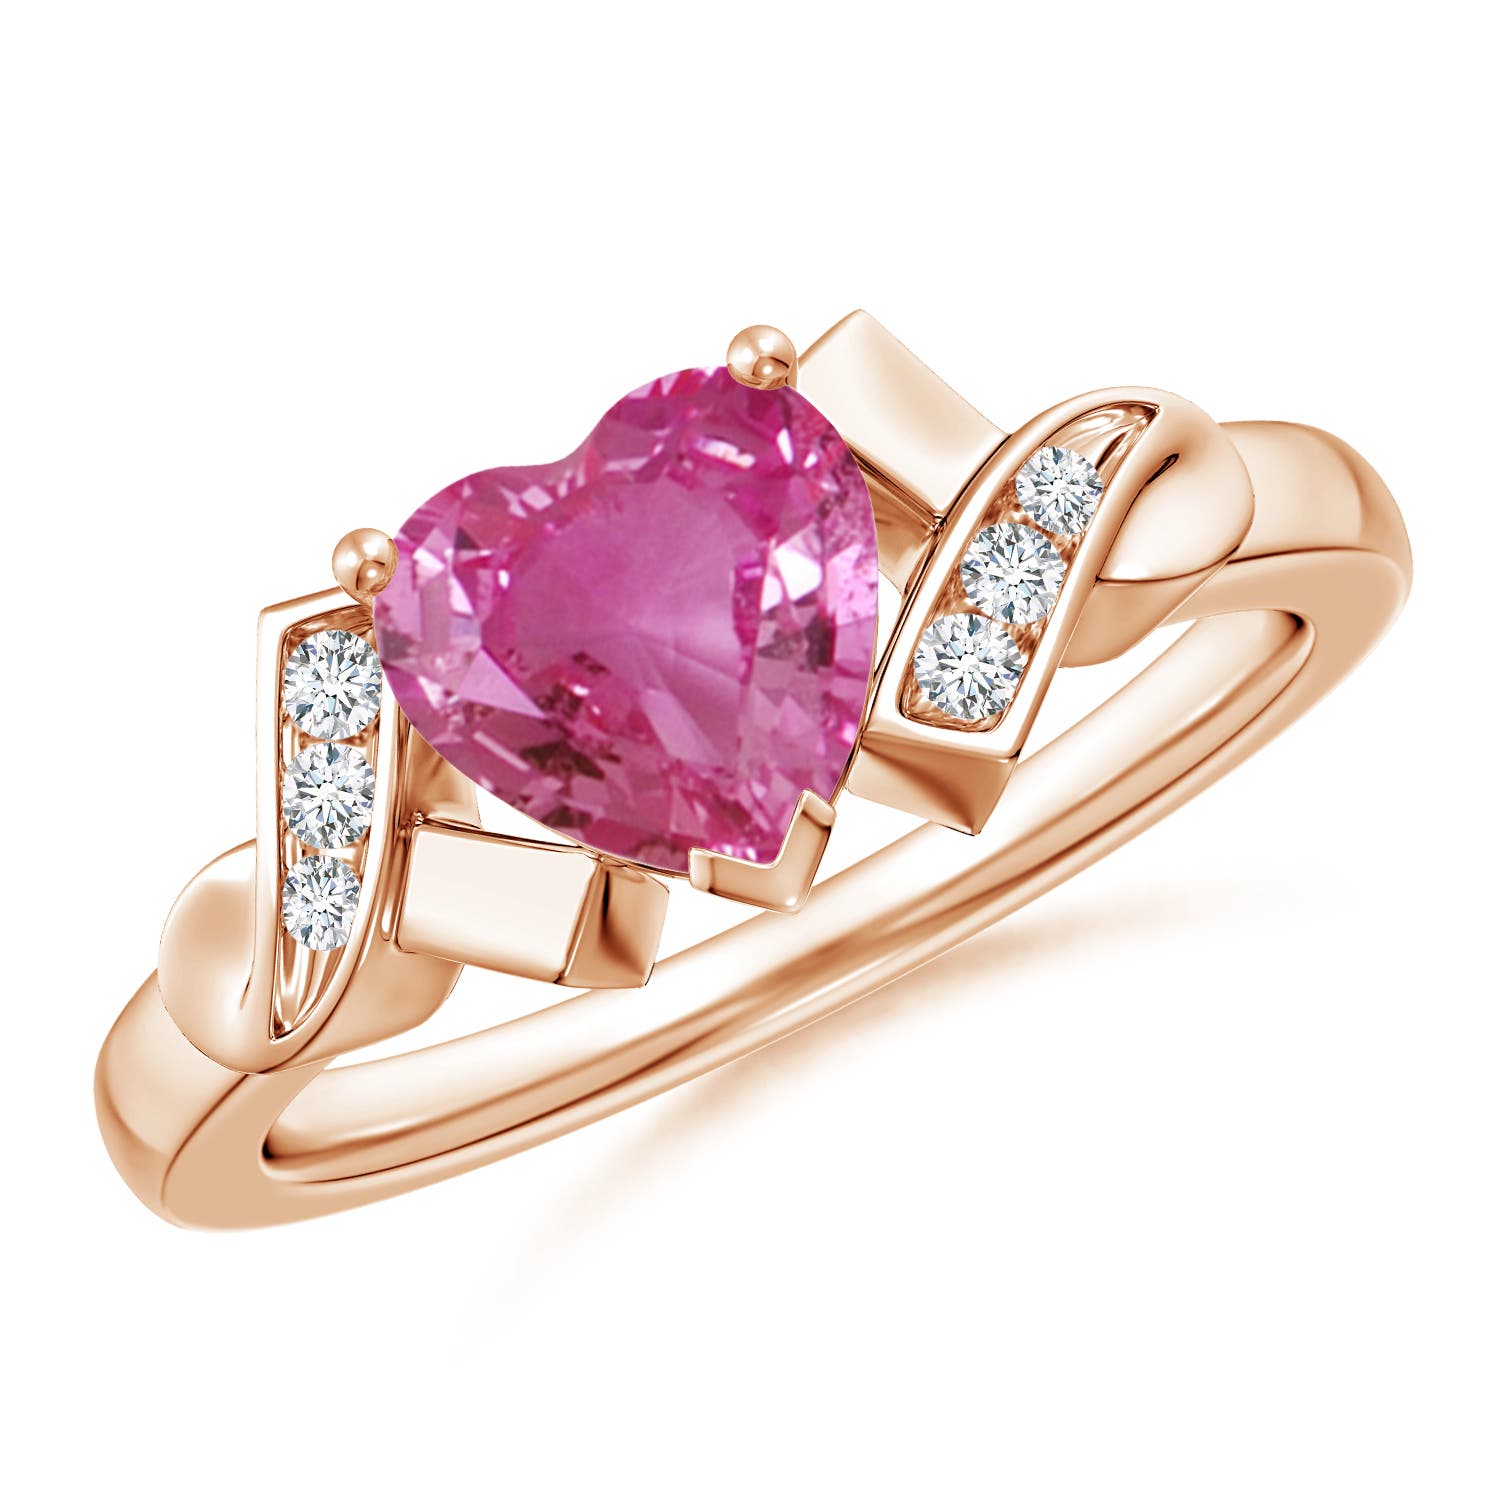 Solitaire Pink Sapphire Heart Ring with Diamond Accents